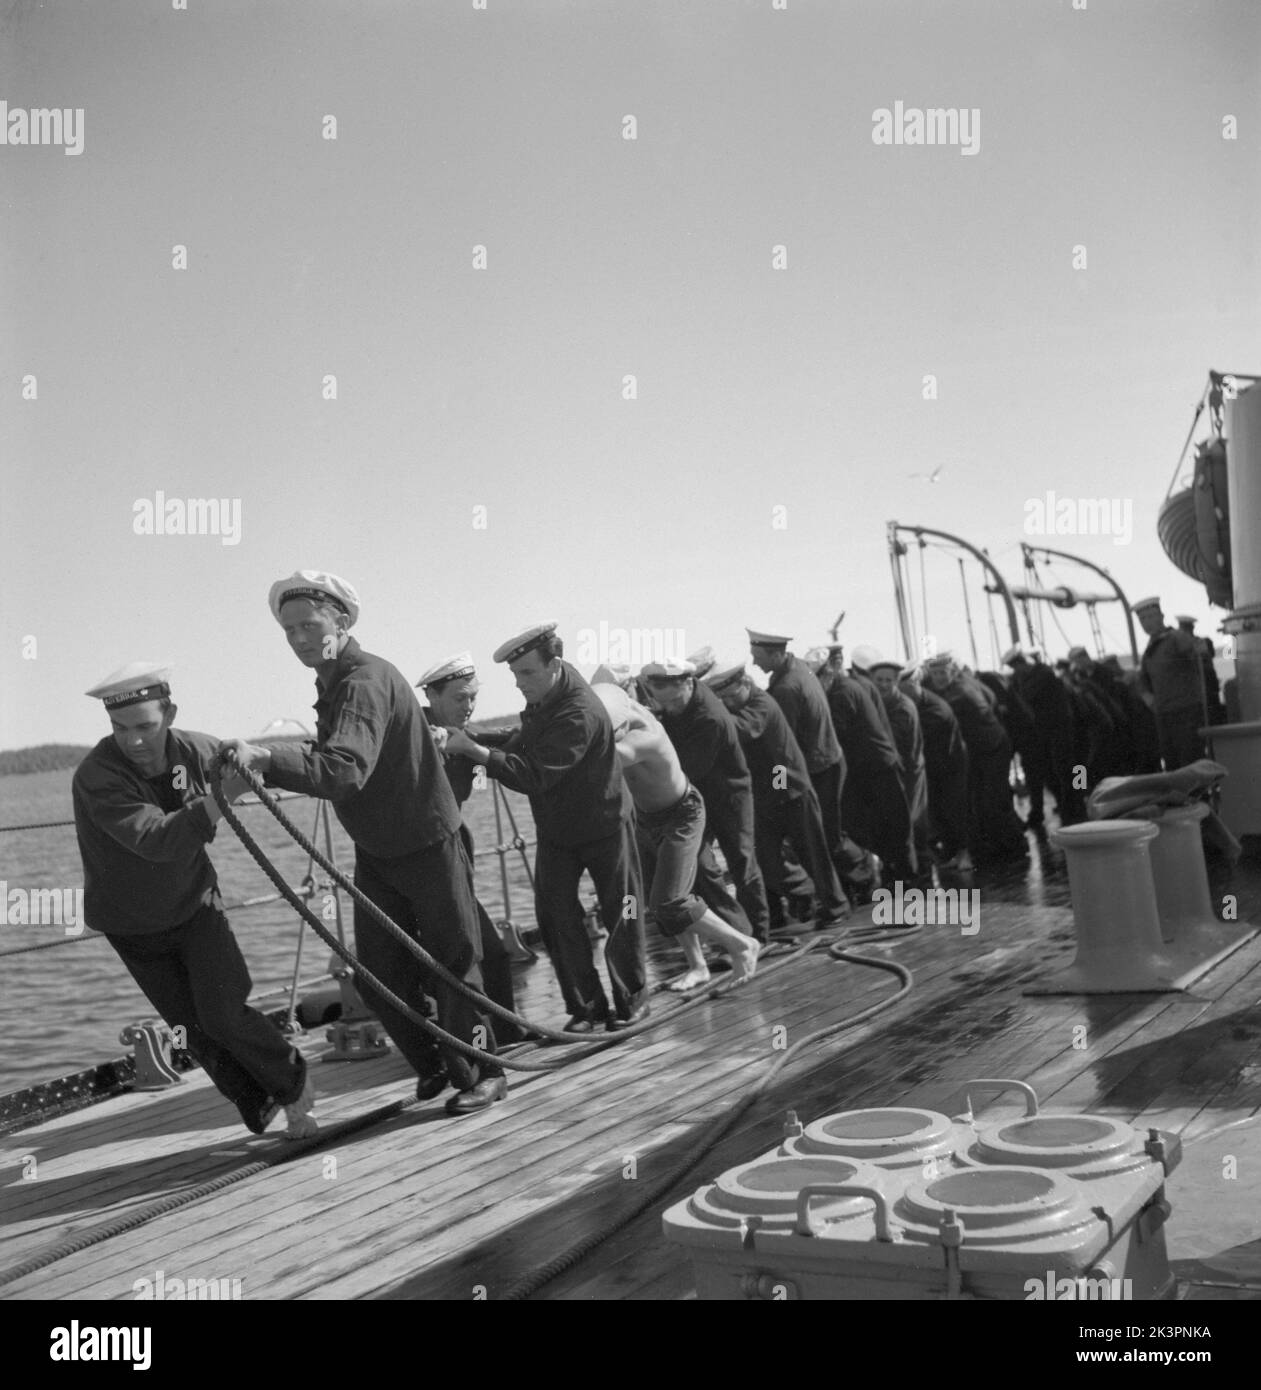 During World war II. The war ship Sverige during navy exercises at sea. The sailors are all pulling something heavy on deck, like an anchor line. Sweden june 1940. Kristoffersson ref 141 Stock Photo